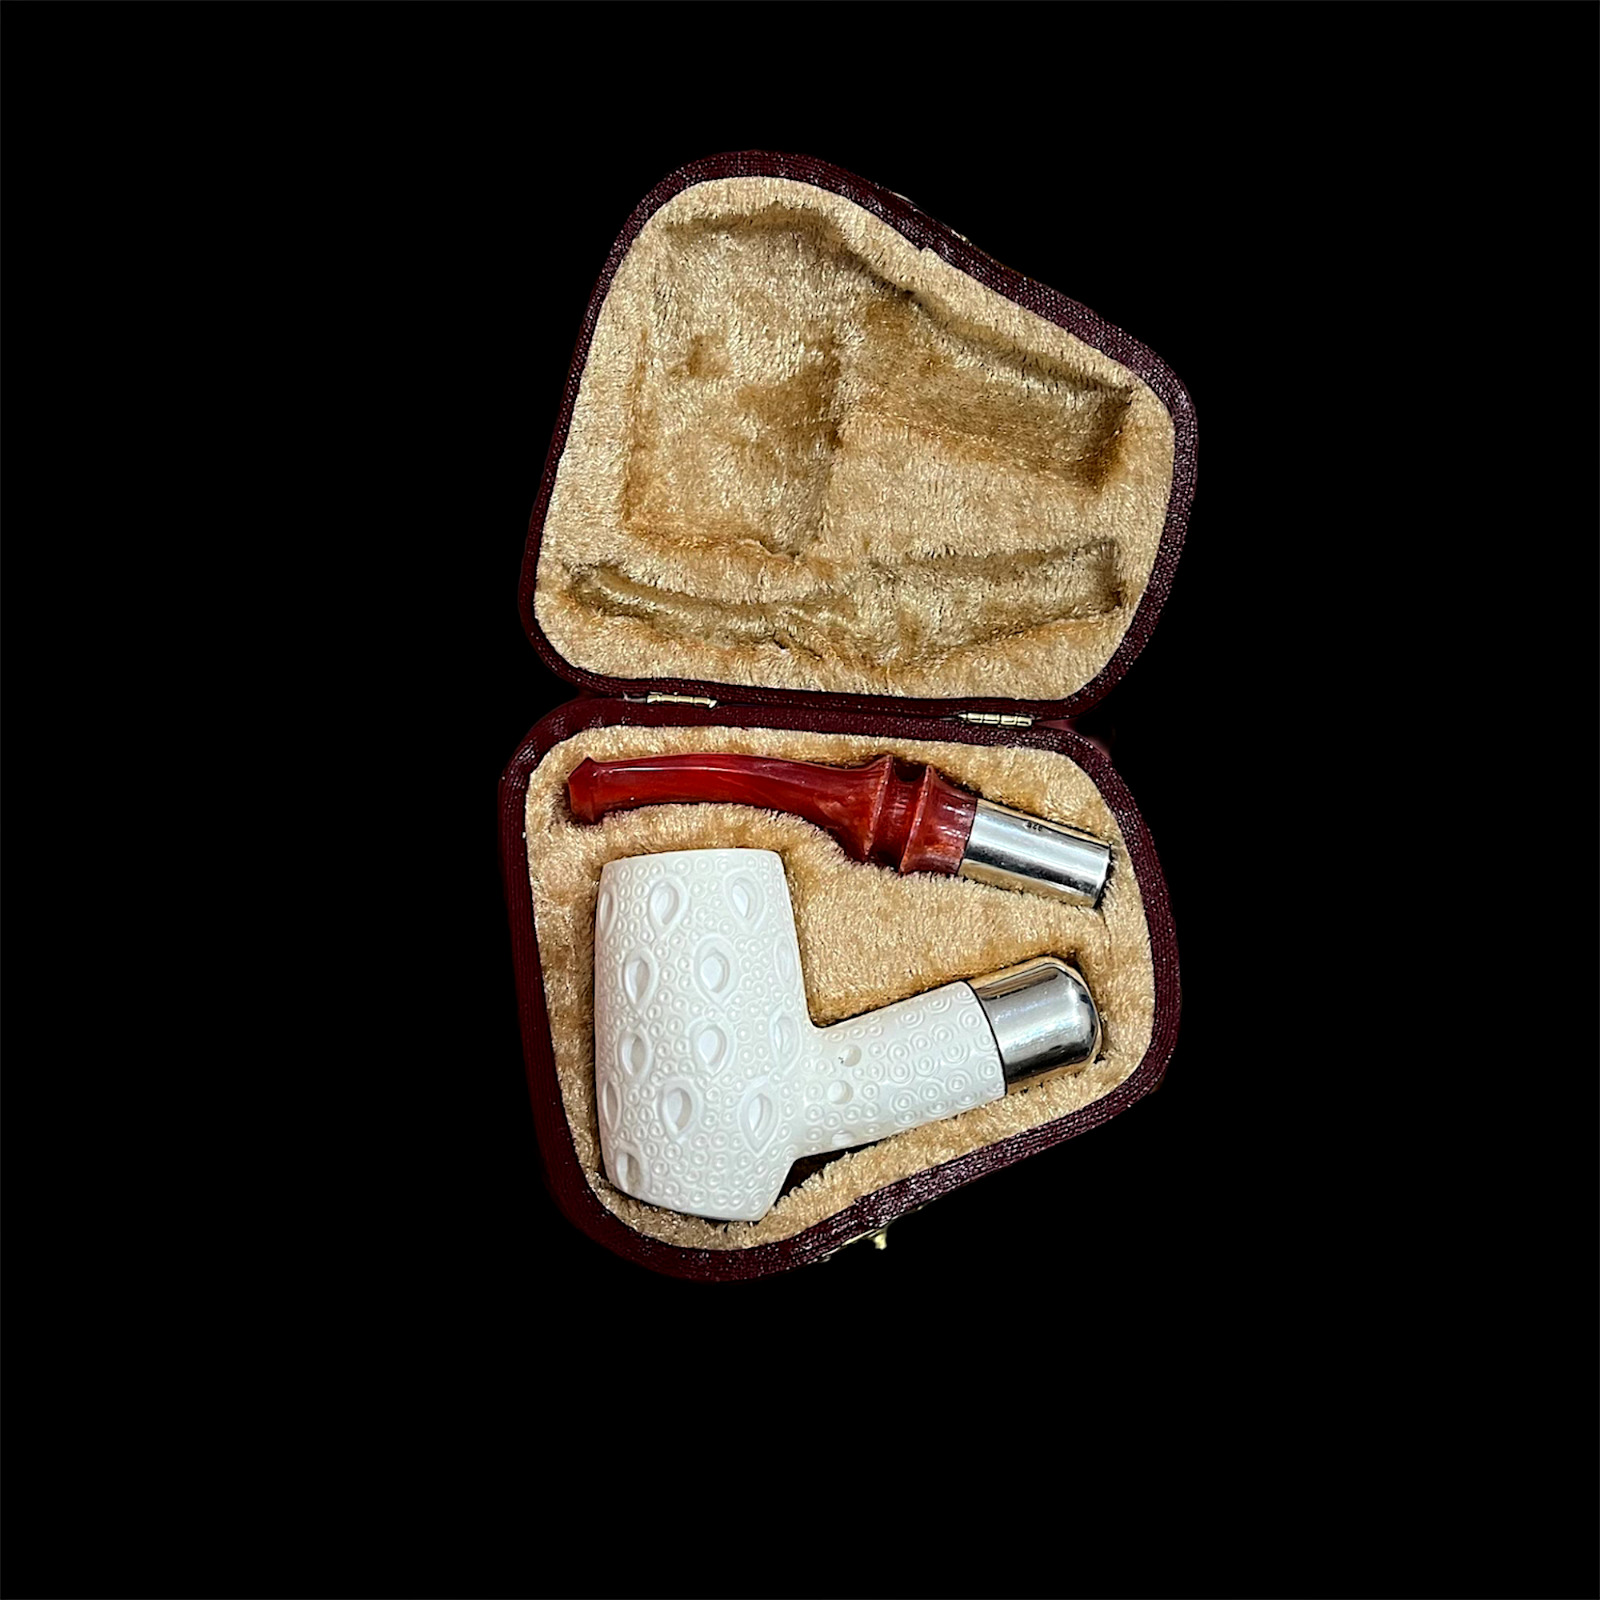 Block Meerschaum Pipe 925 silver unsmoked smoking tobacco pipe w case MD-331